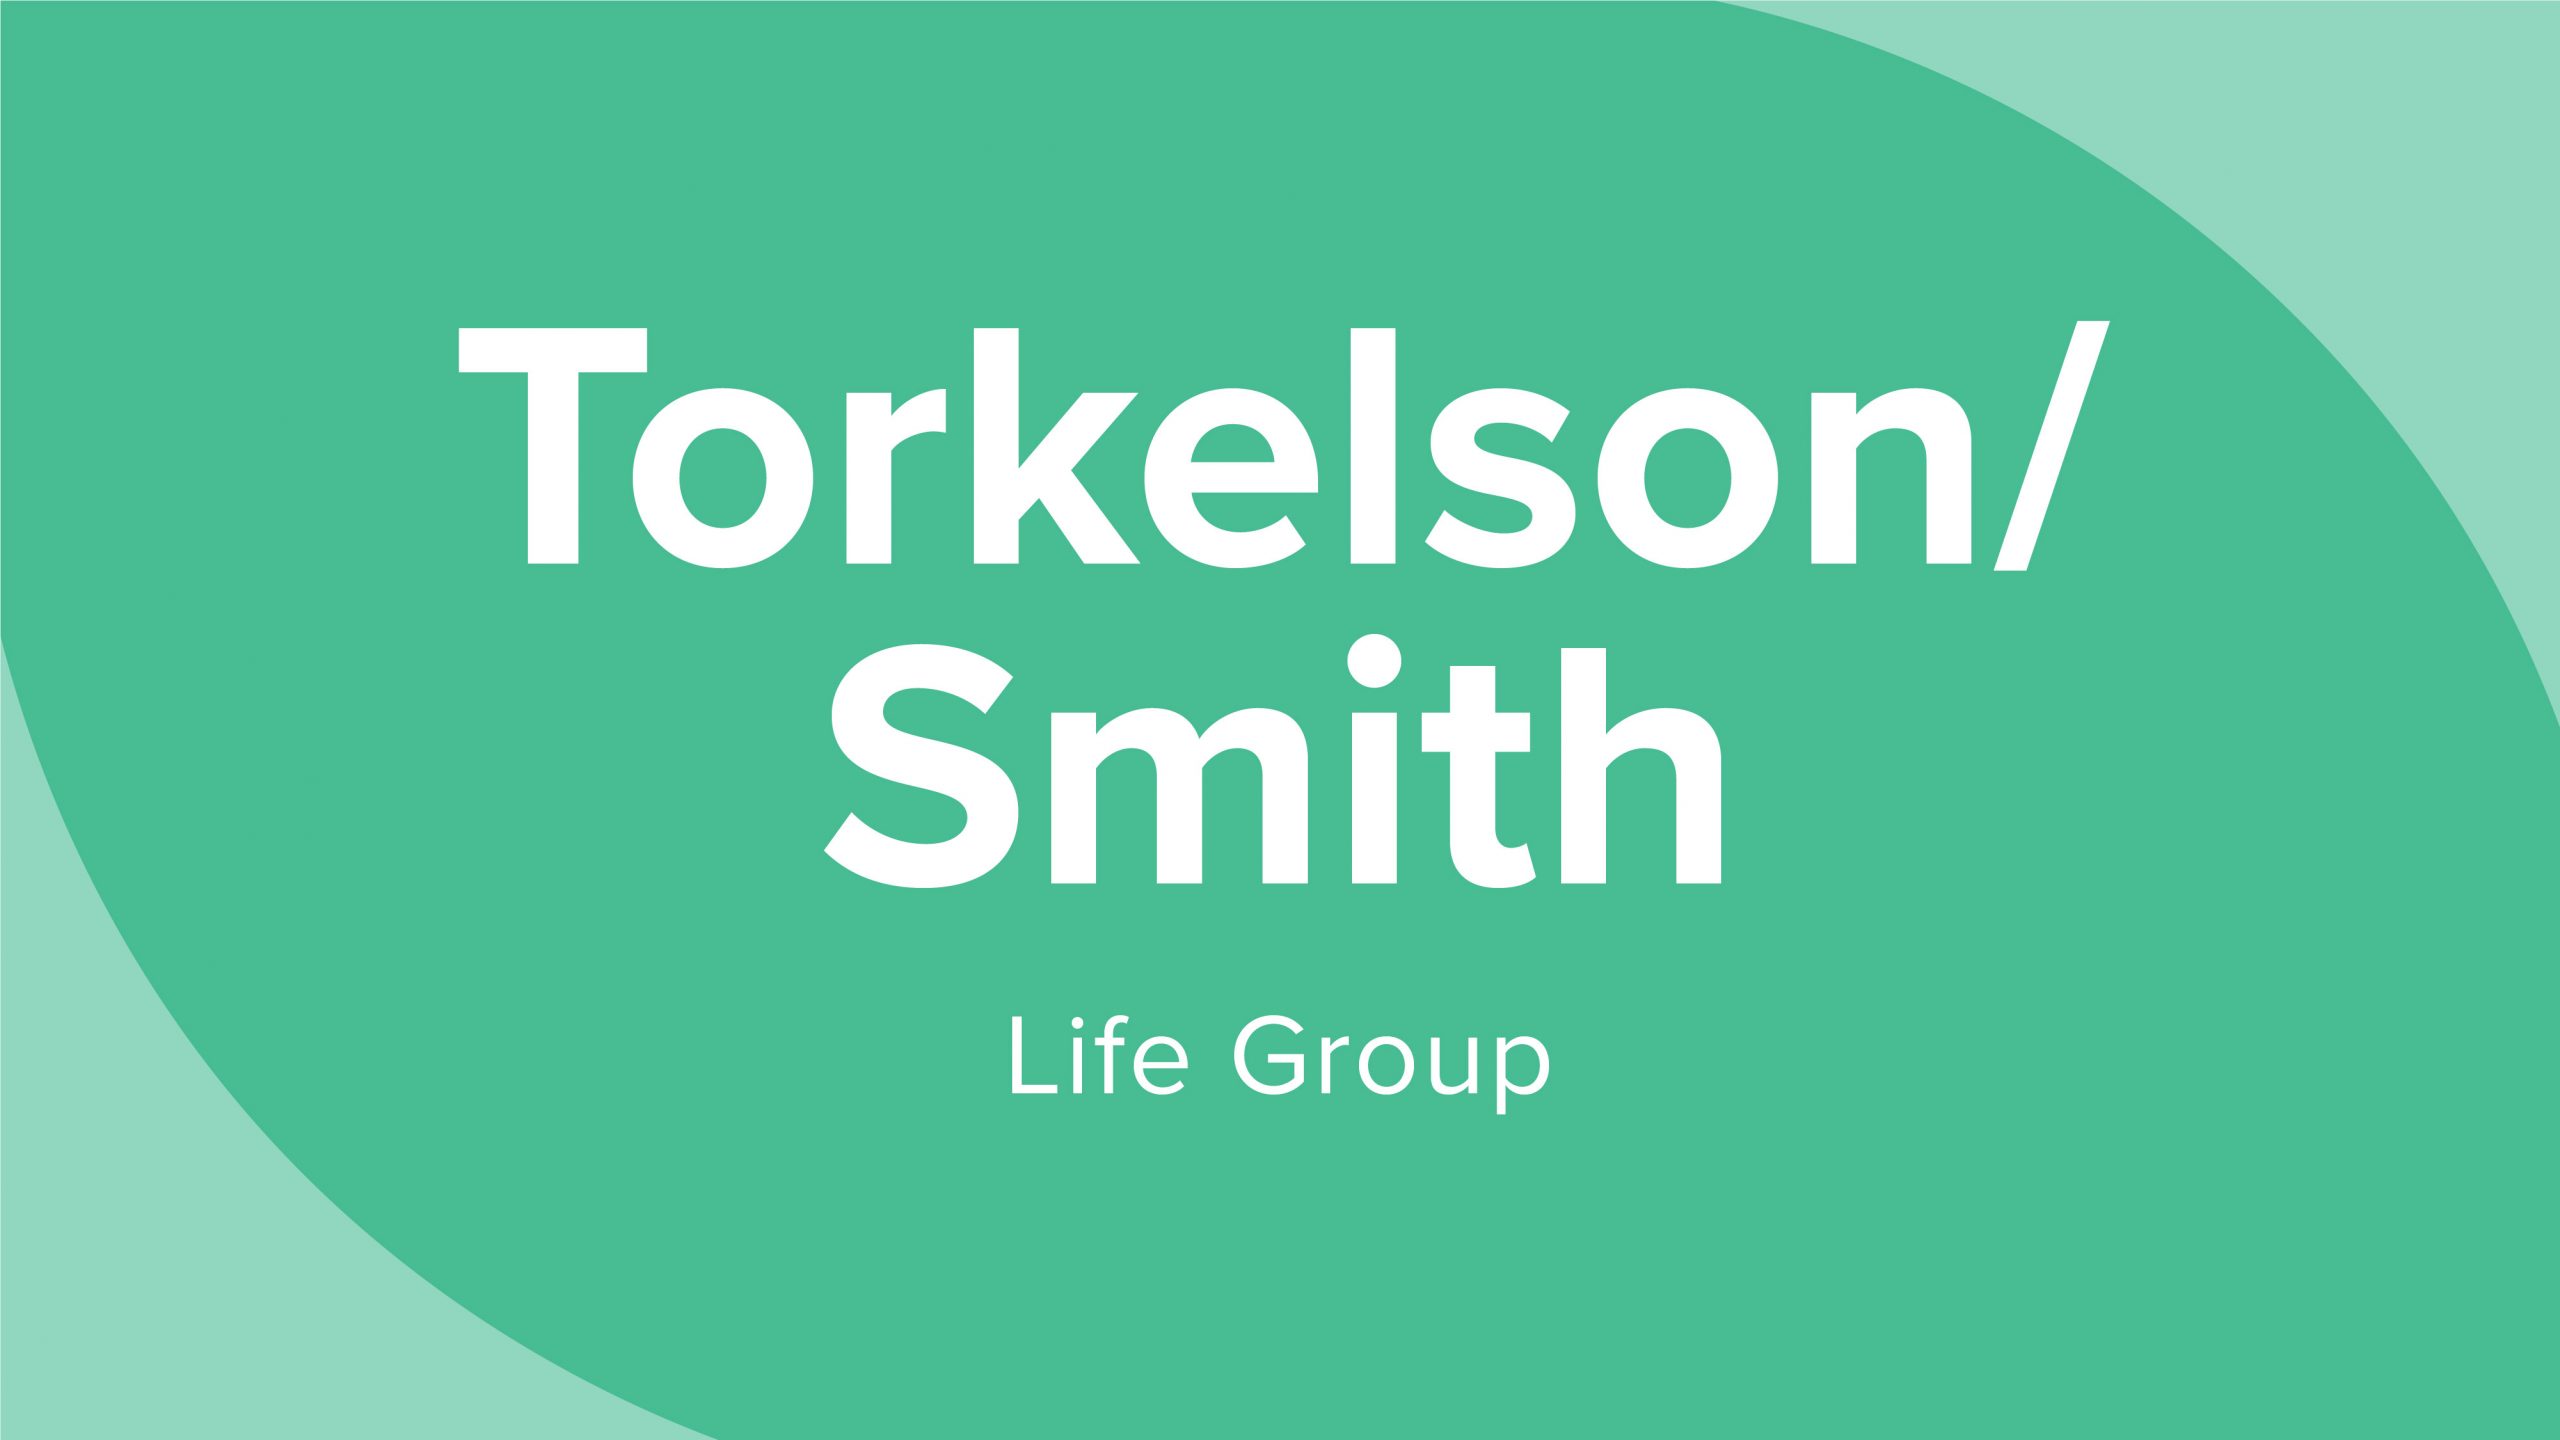 Torkelson/Smith Life Group